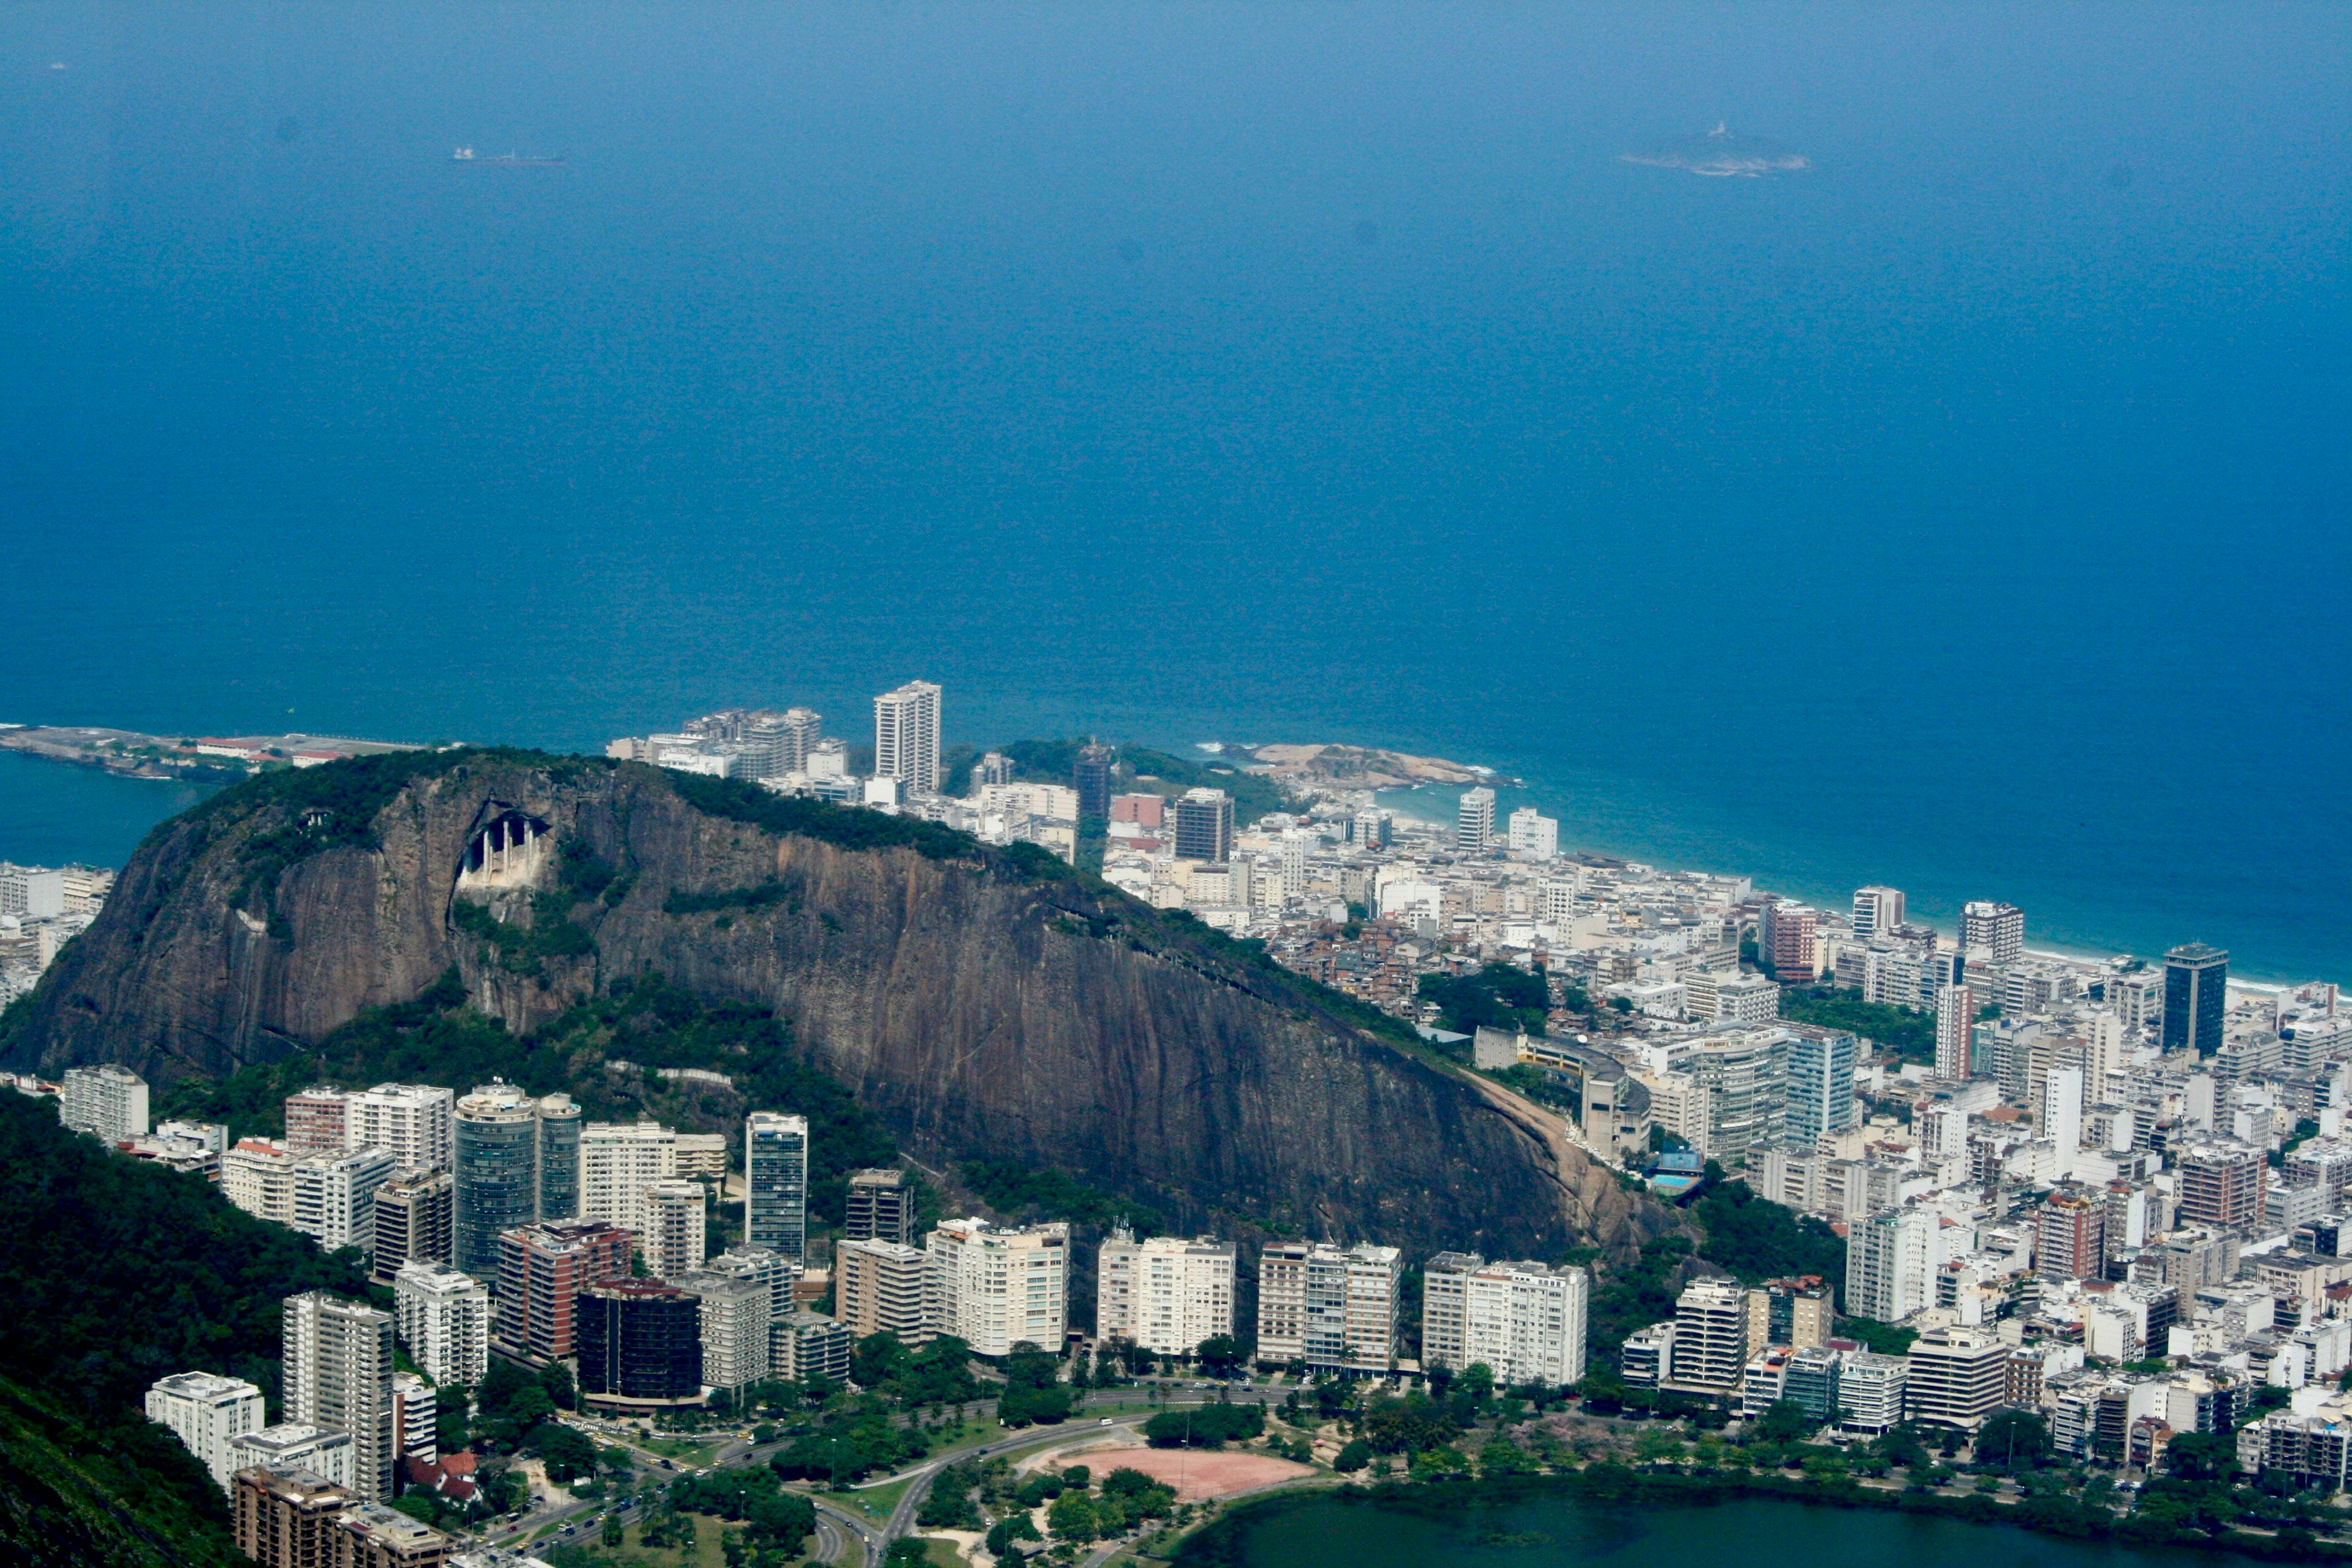 aerial view of city buildings near body of water during daytime